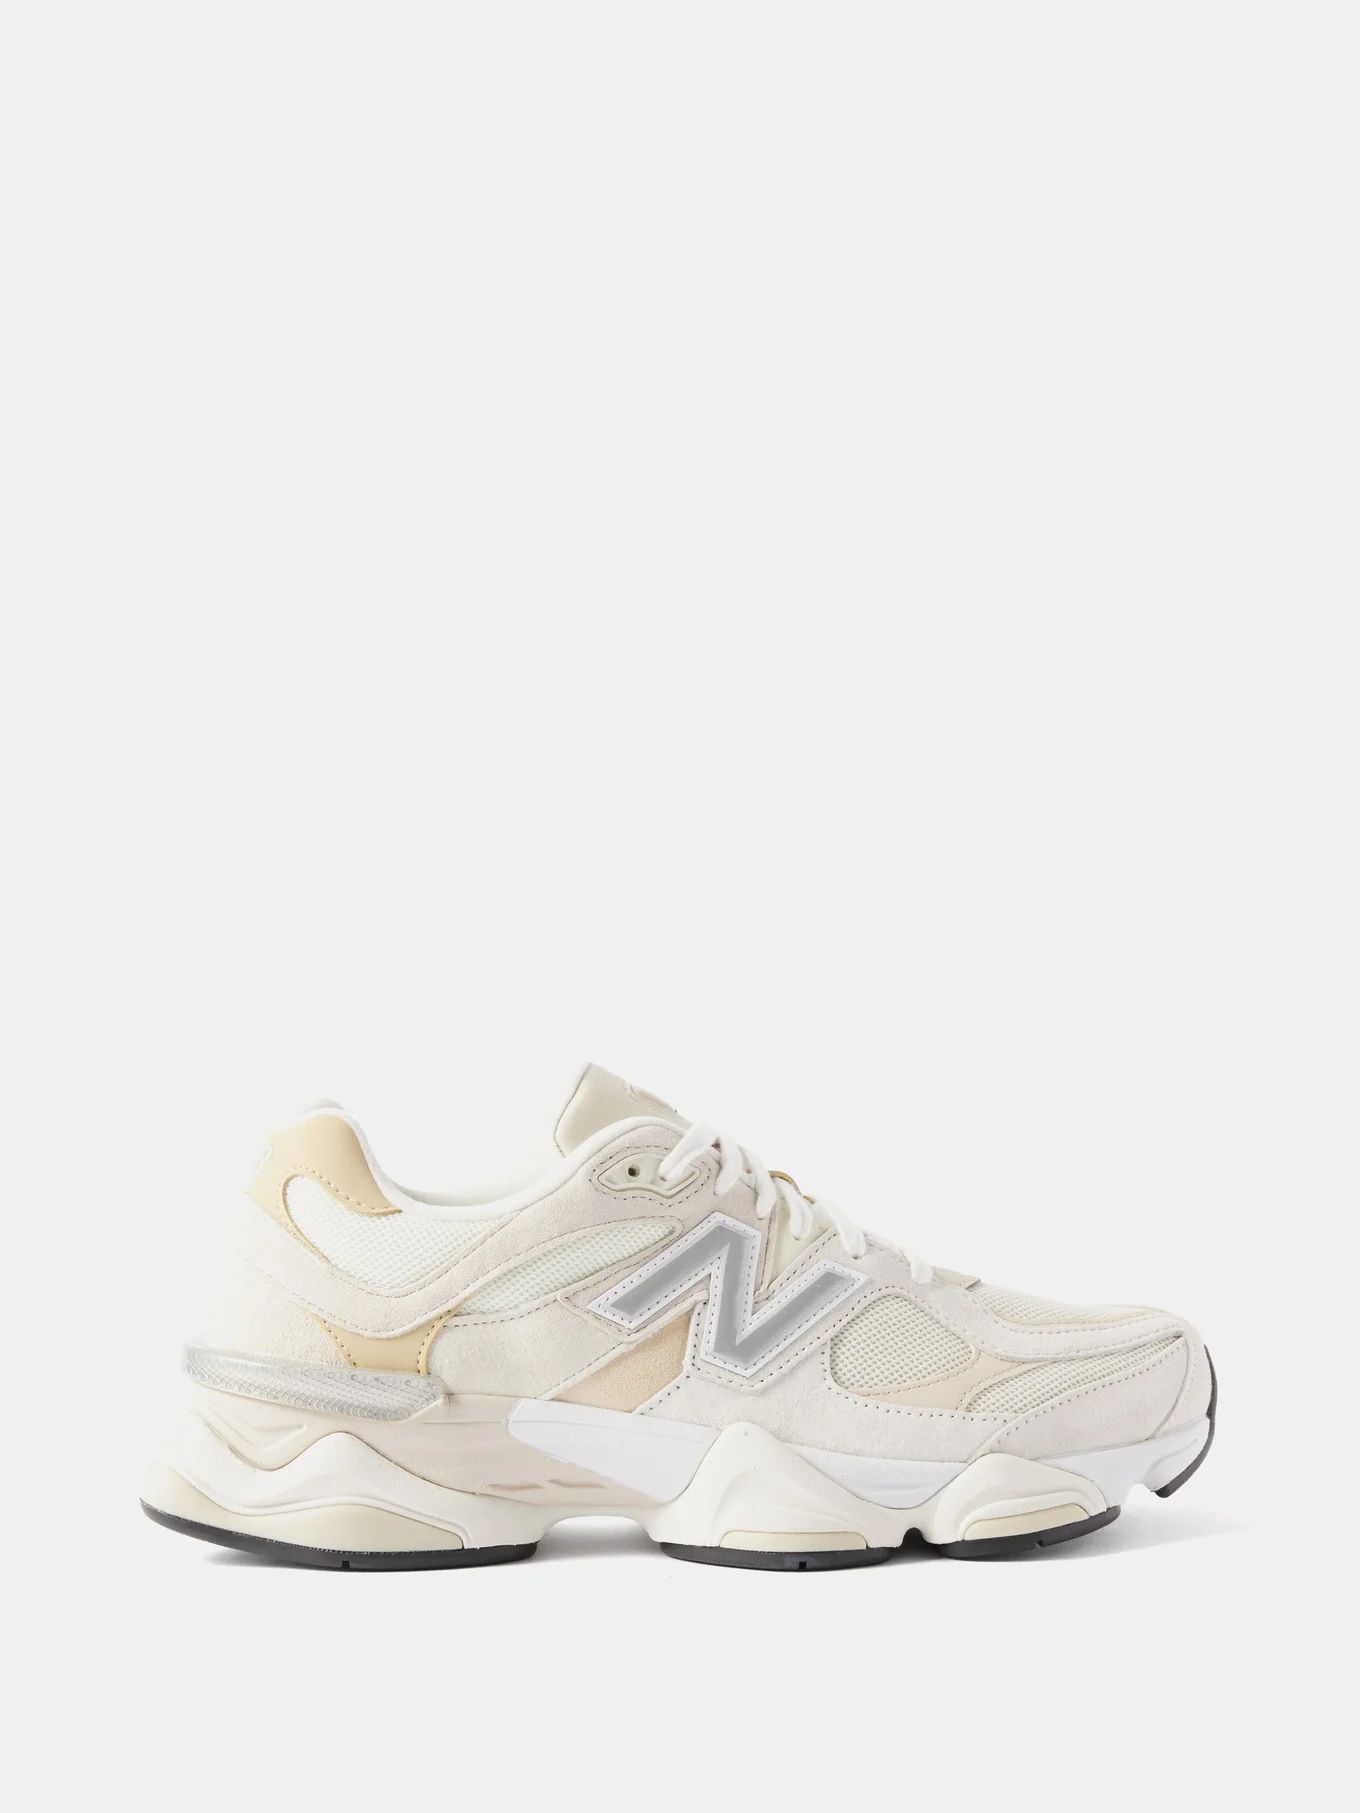 9060 suede and mesh trainers | New Balance | Matches (UK)